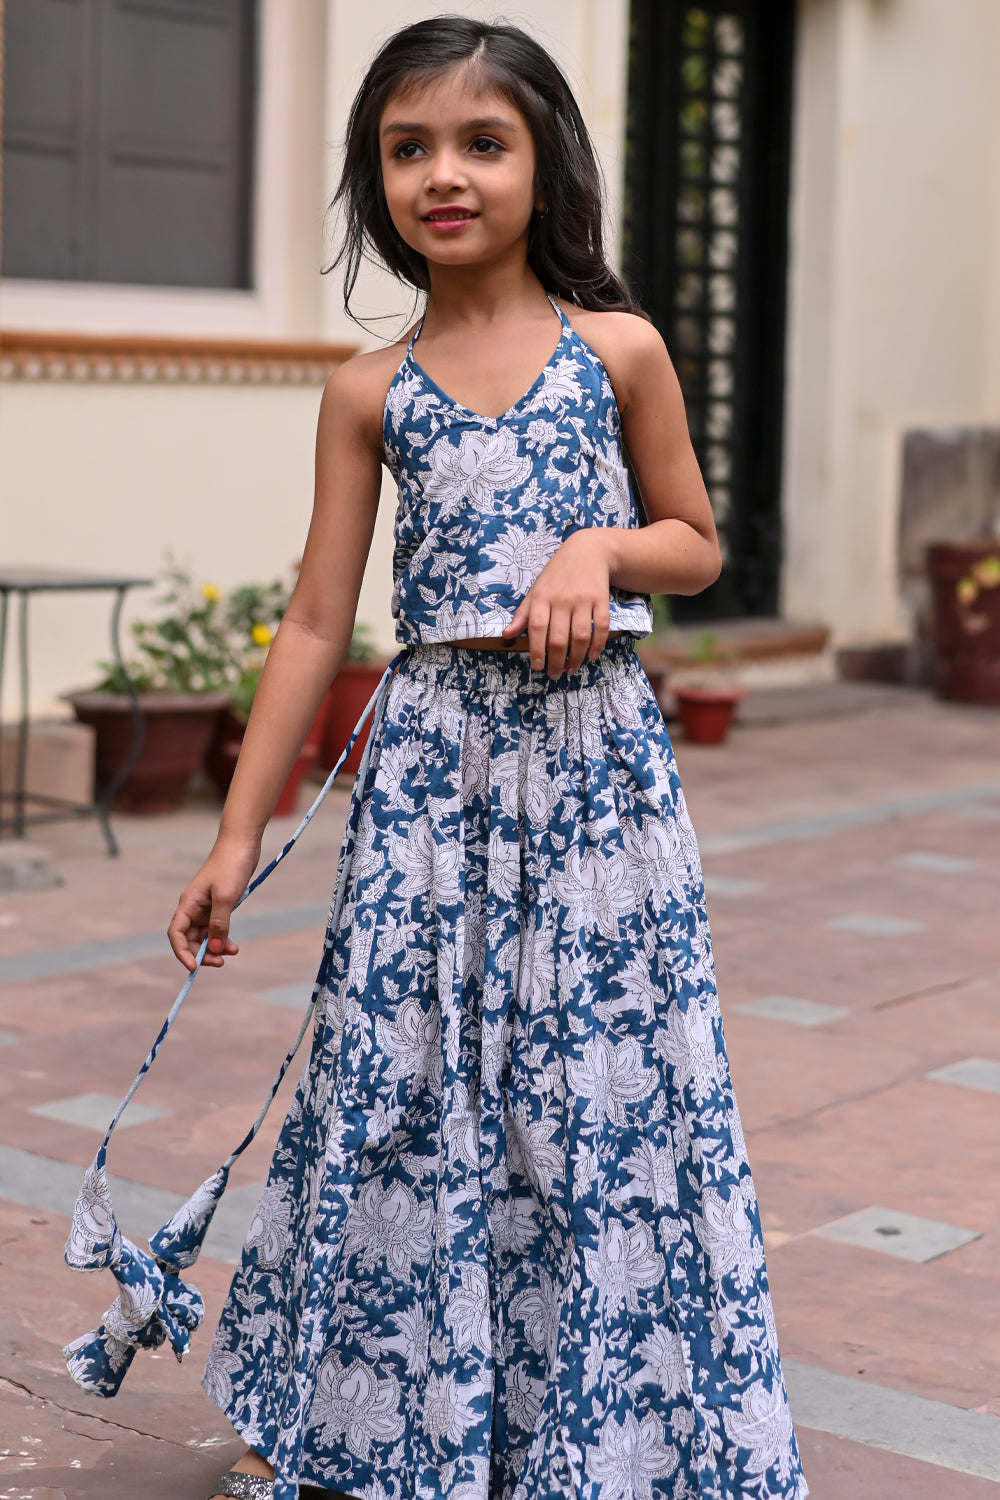 Indigo Girl Kid Halter Top and Long Skirt |  Custom Gowns | Made To Order